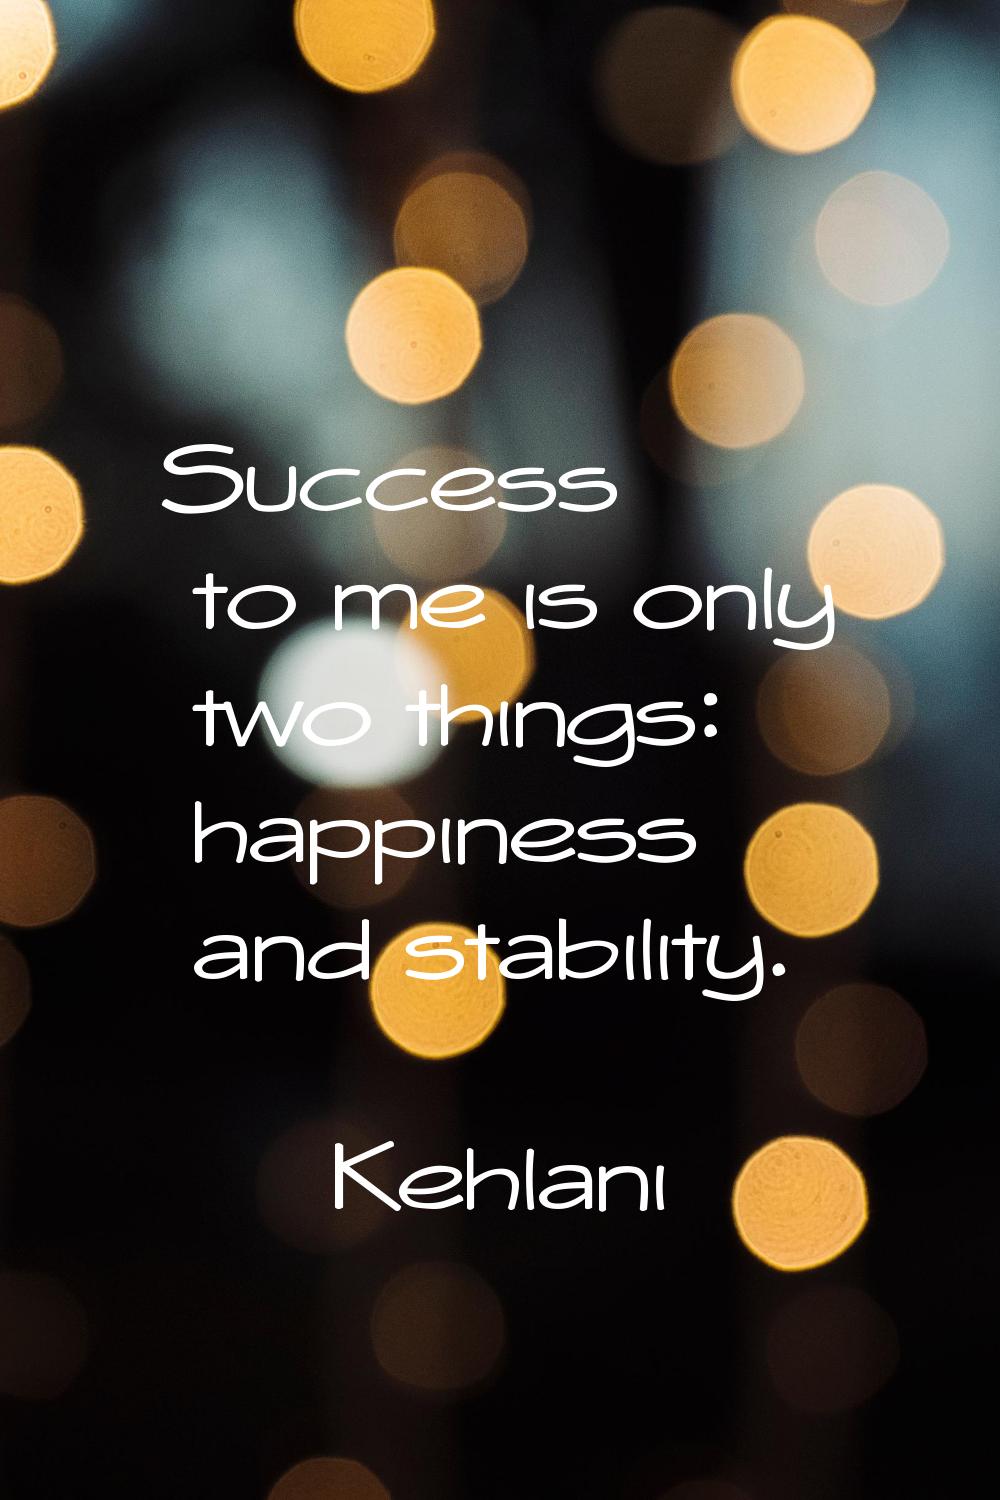 Success to me is only two things: happiness and stability.